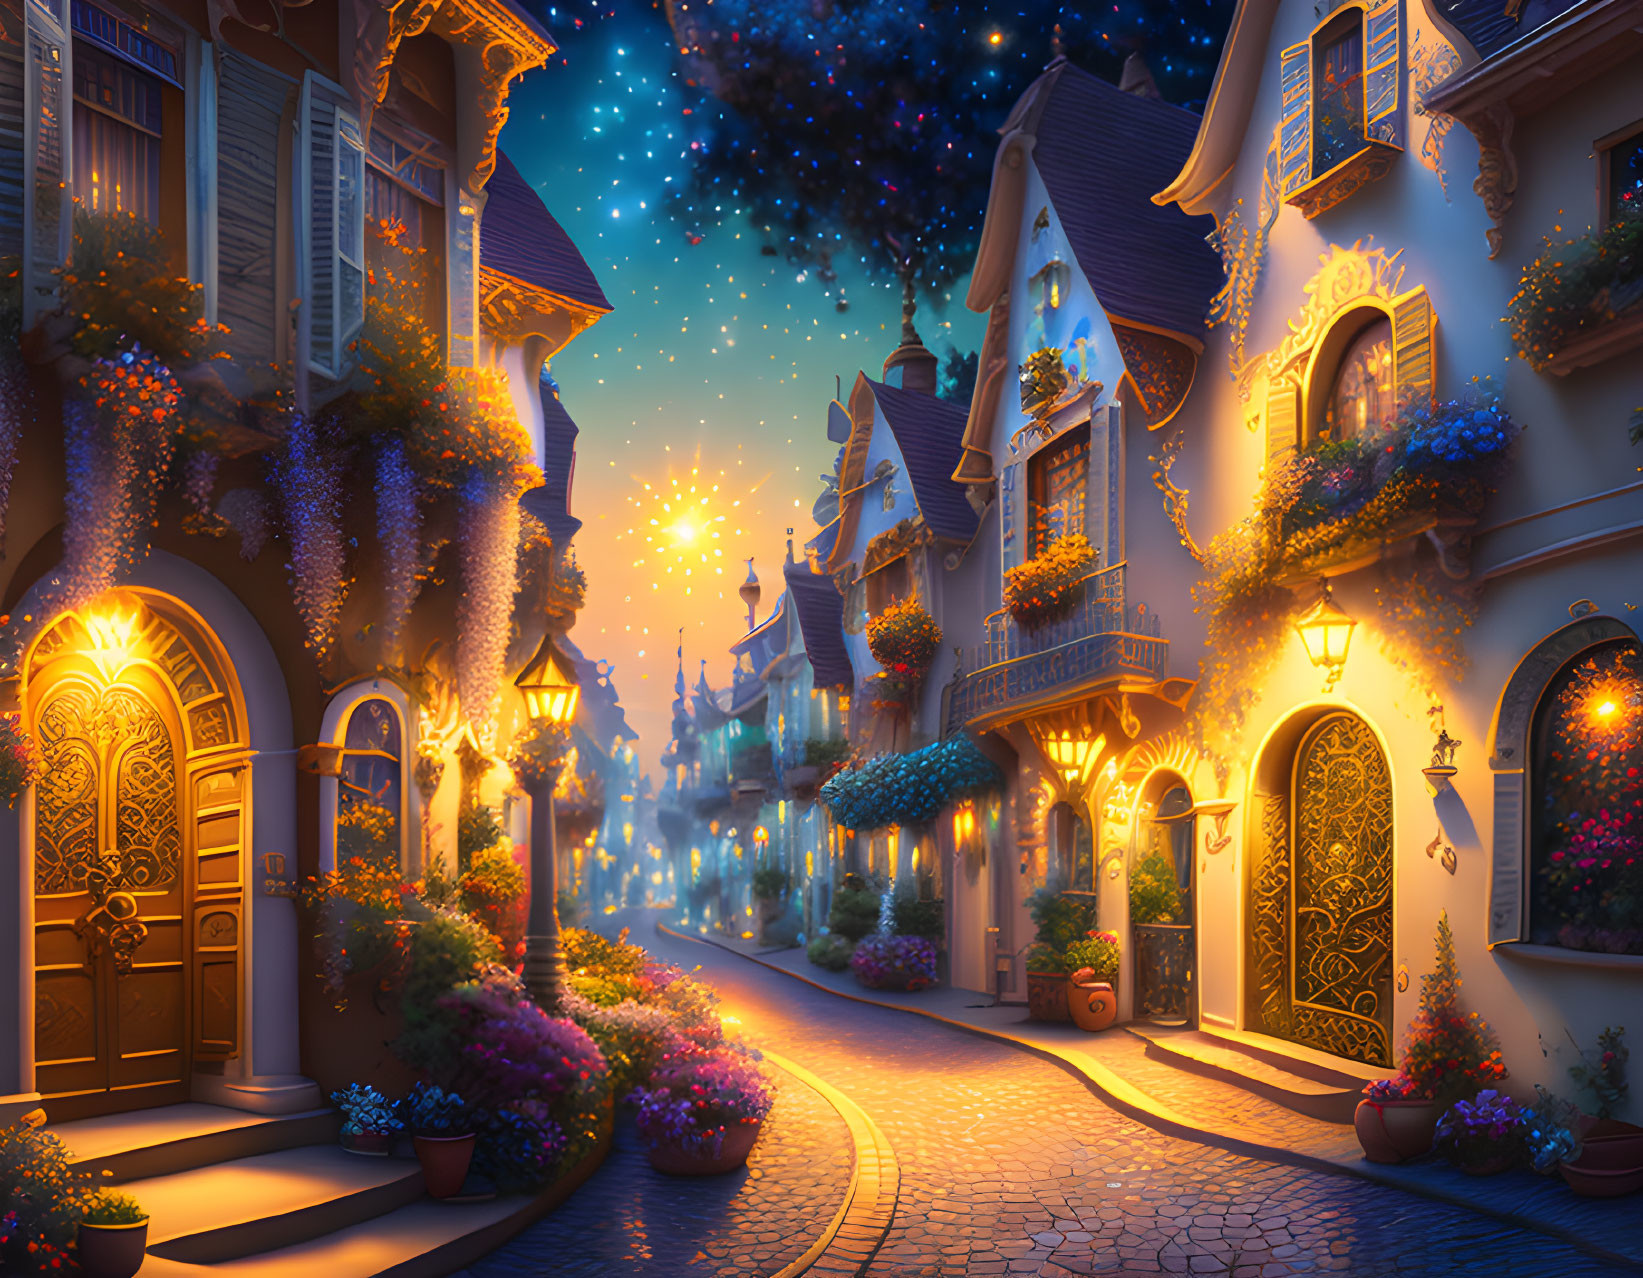 Cobblestone street with colorful houses under starry sky